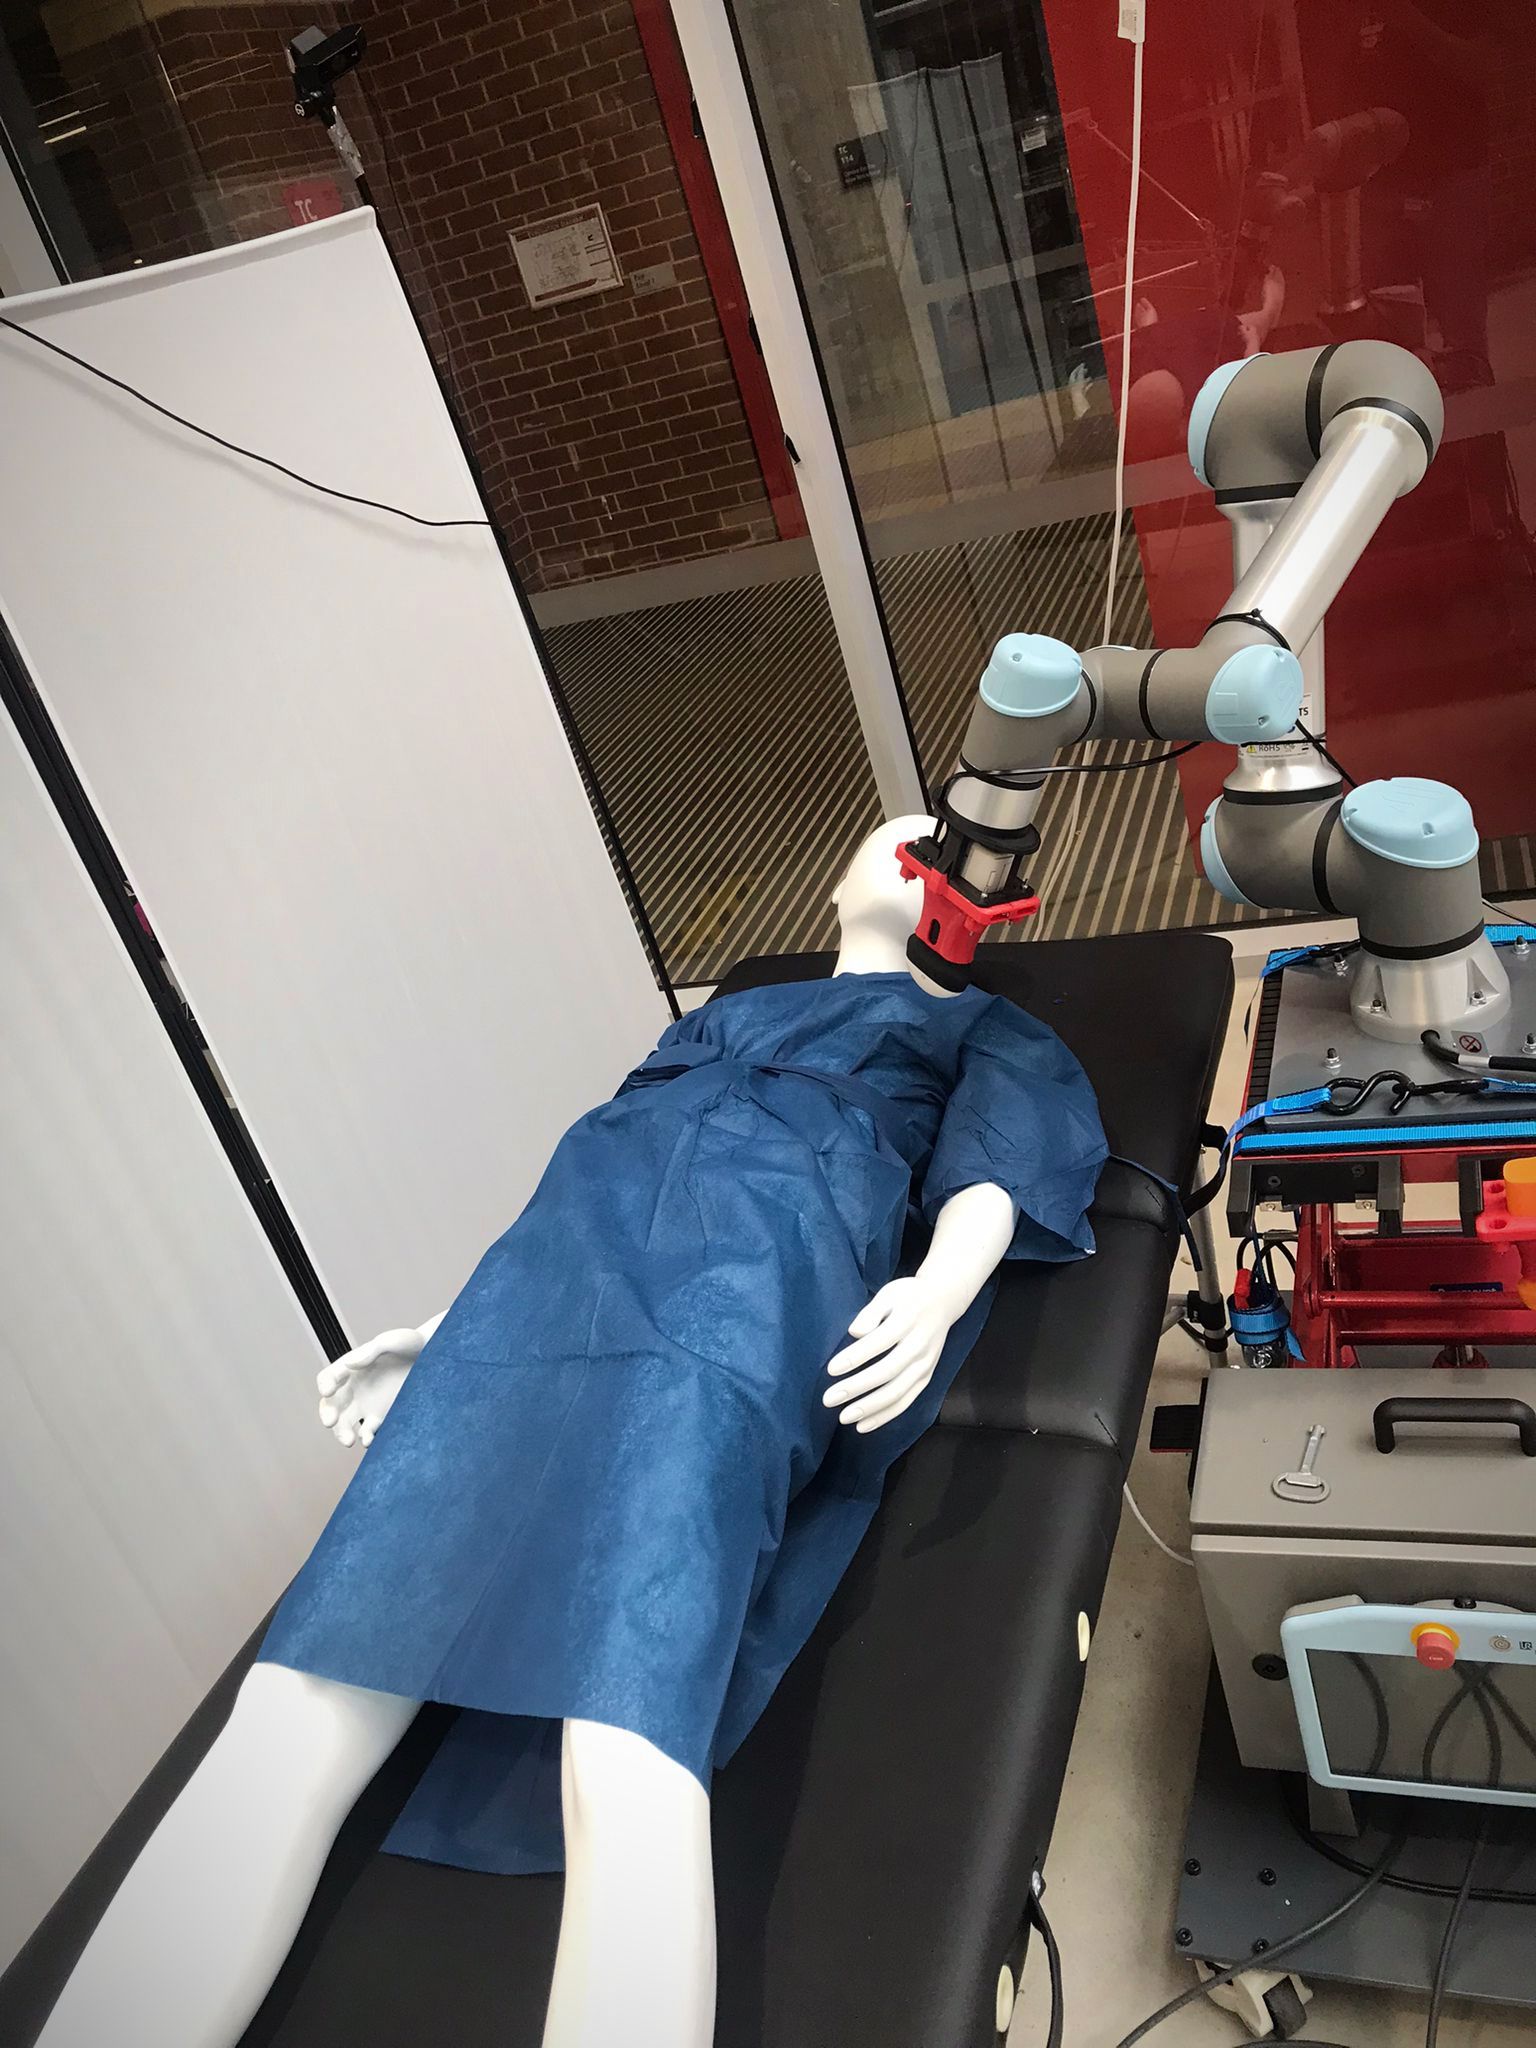  A cobot system for teleoperated heart ultrasound examinations